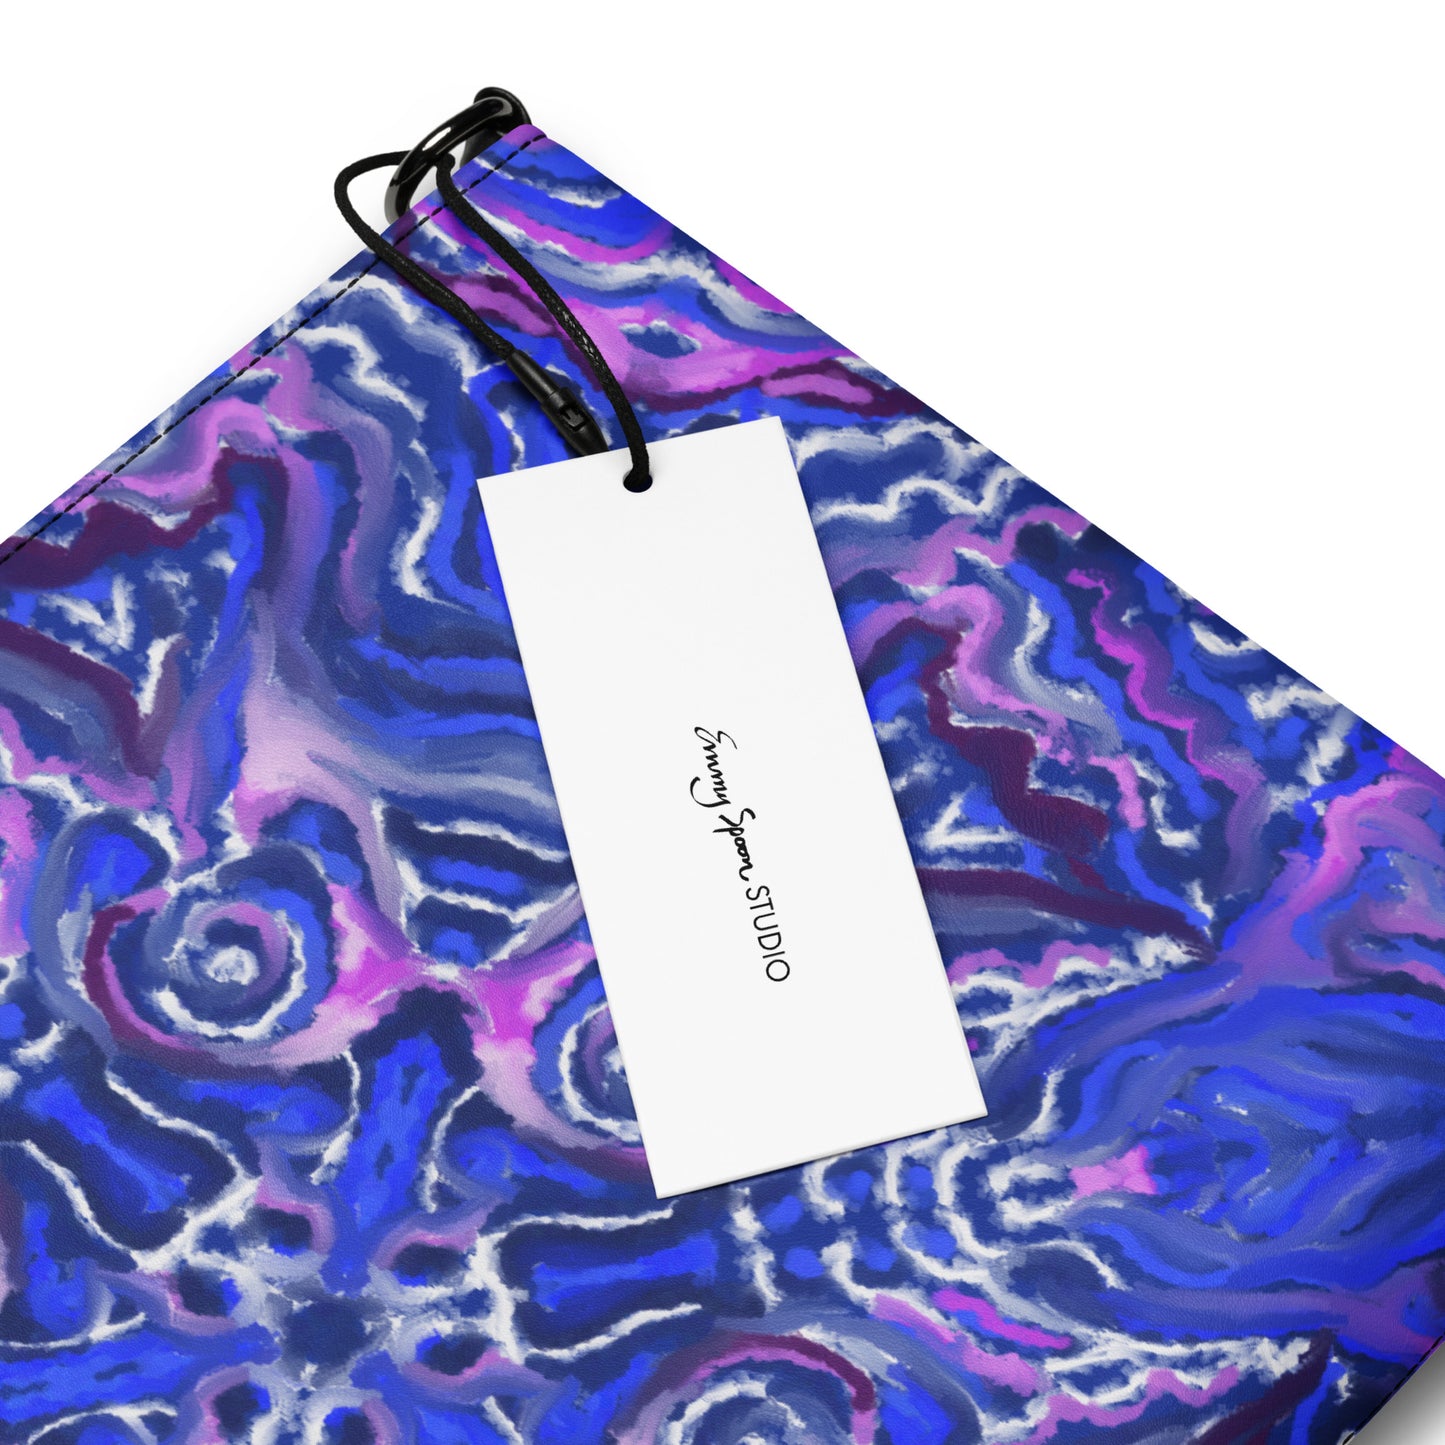 Blue and Purple Crossbody Bag by Emmy Spoon